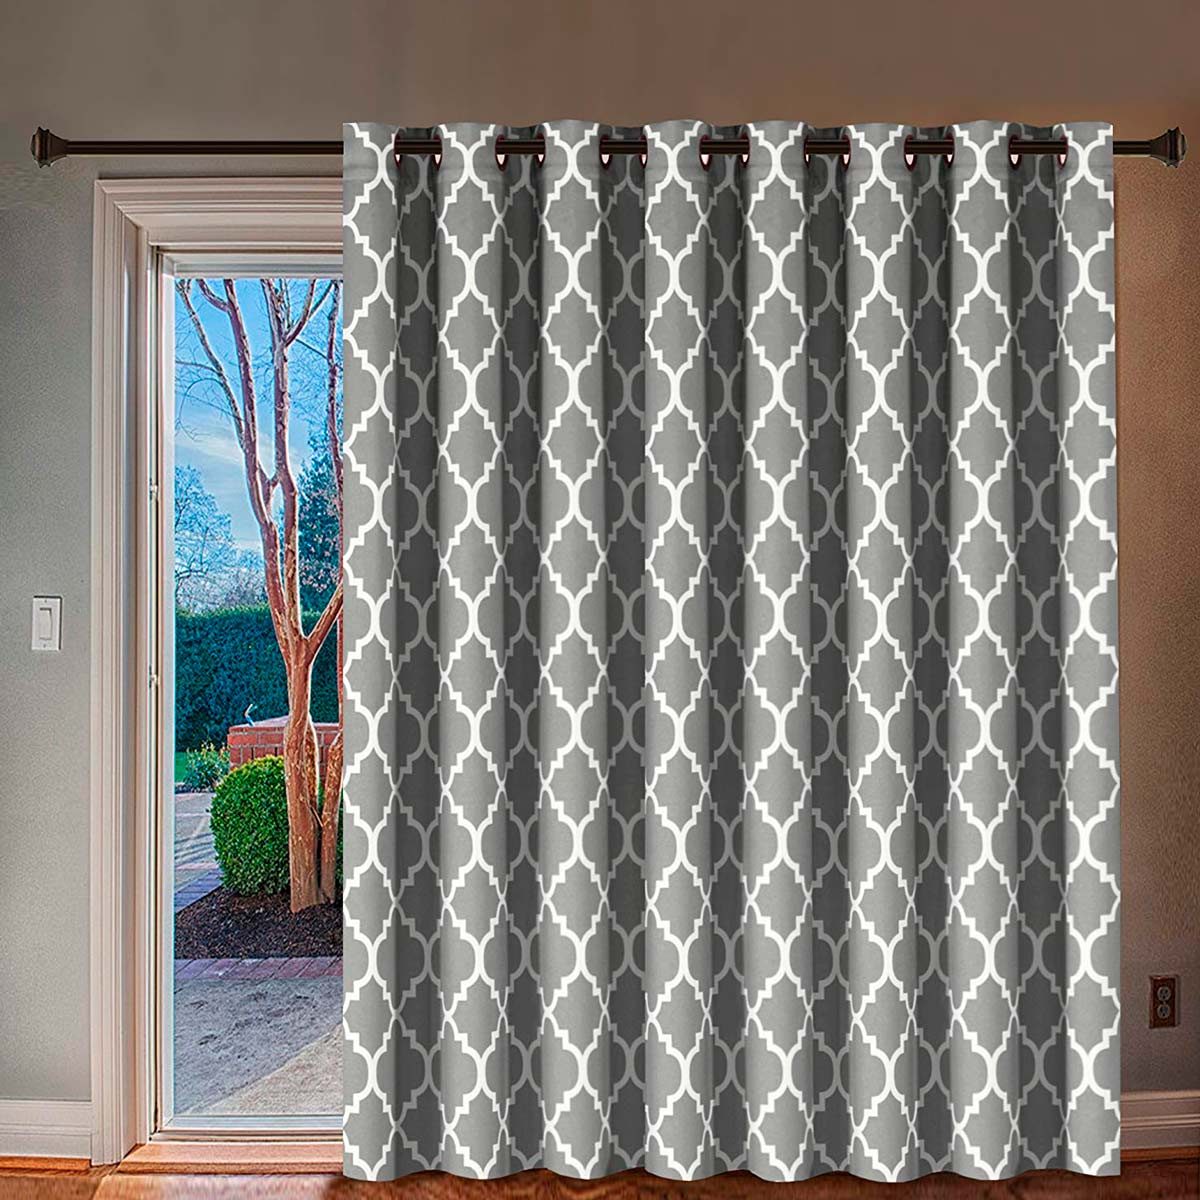 Patio Door Curtain Ideas for Different Needs and Tastes